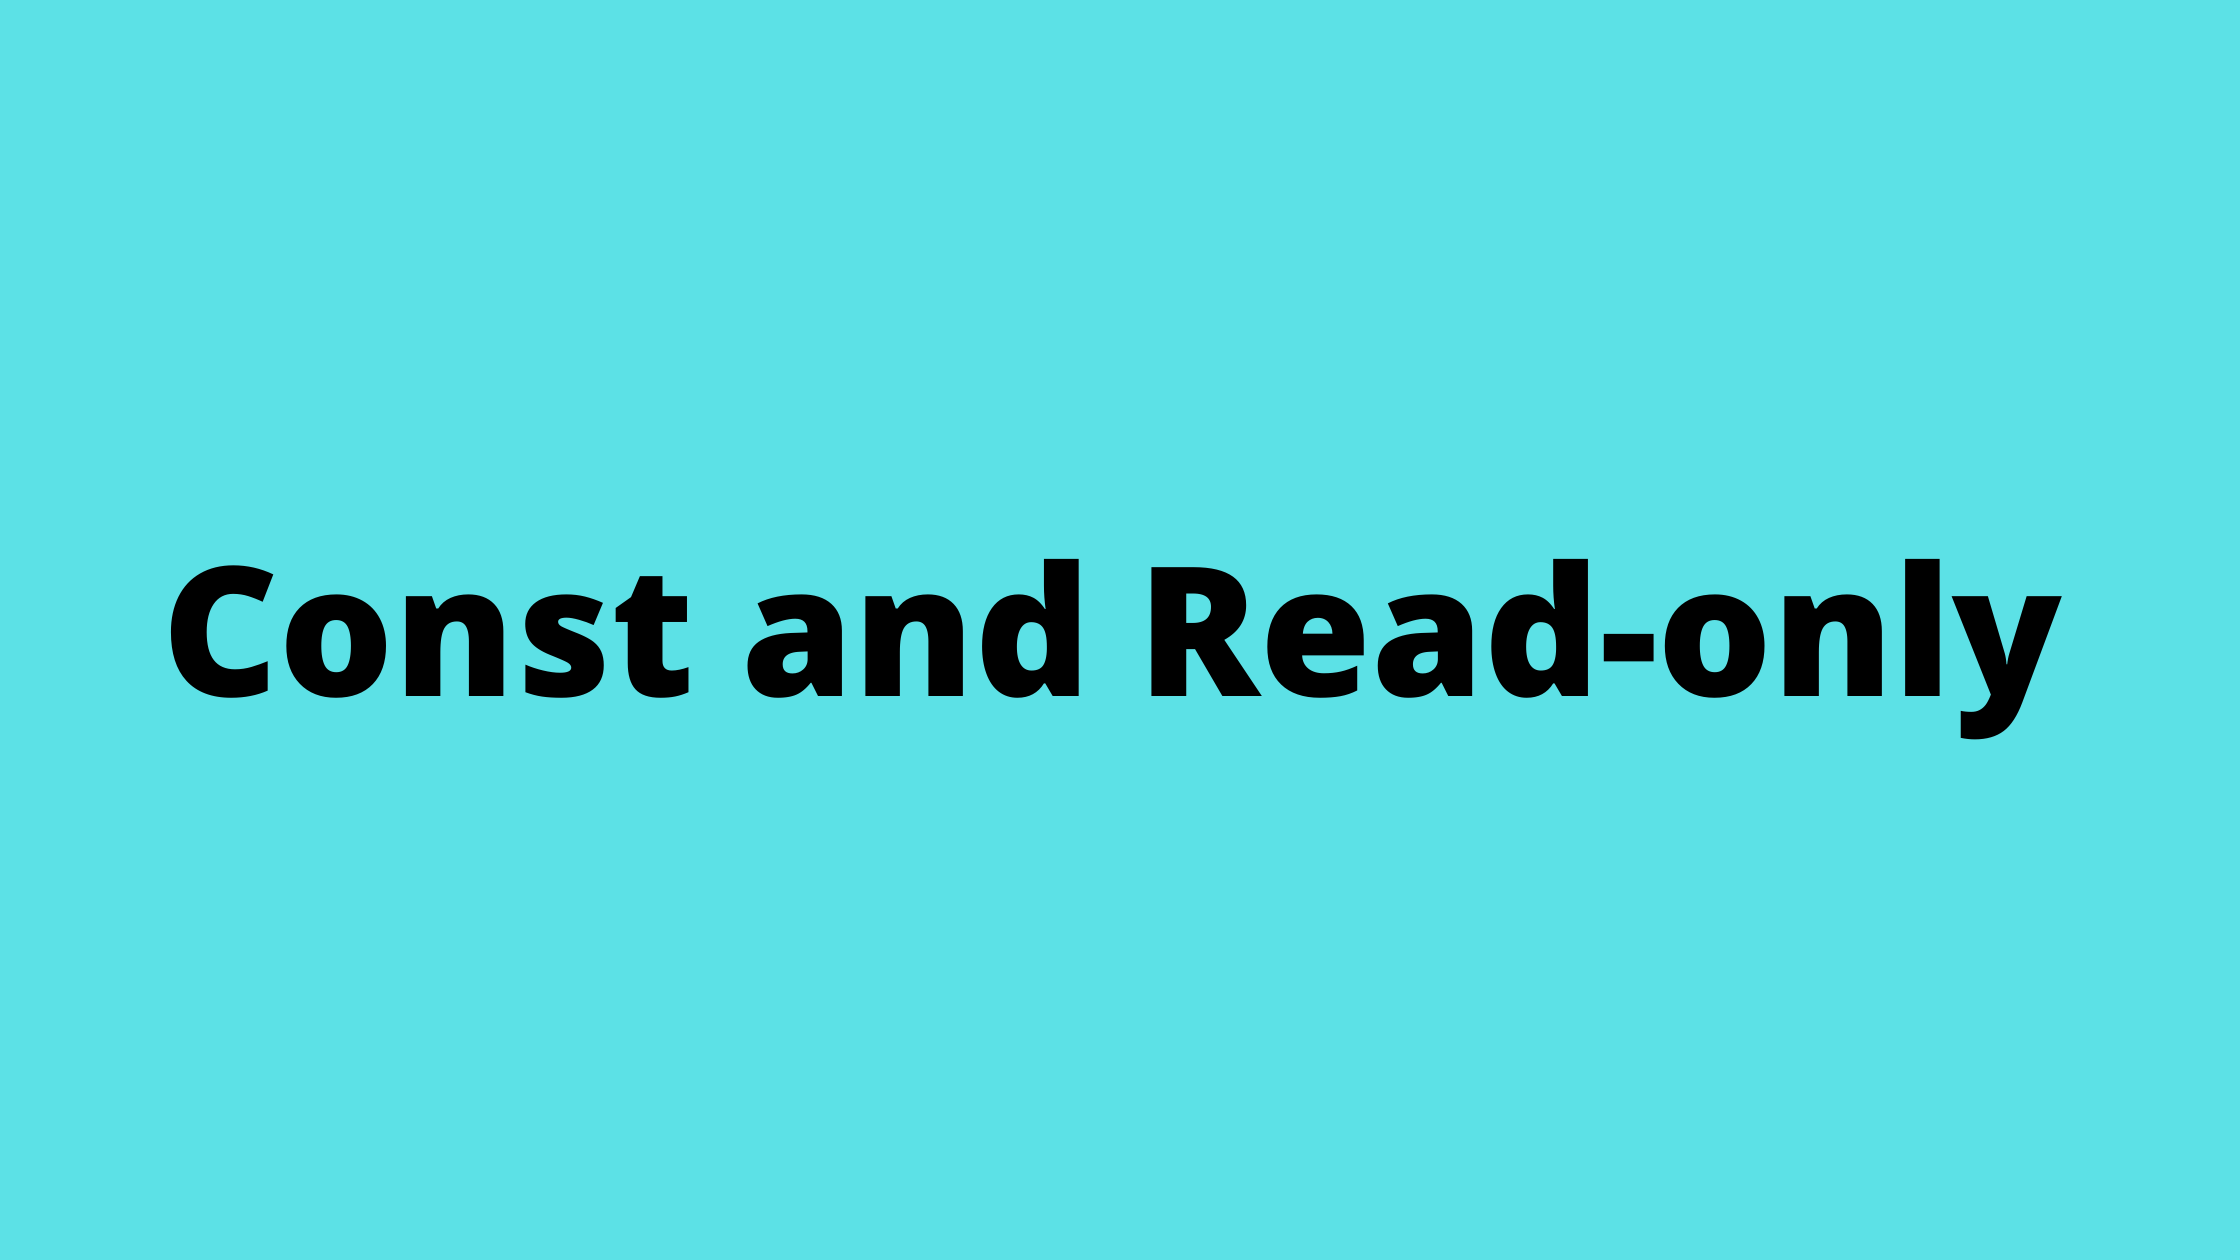 Const and Read-only